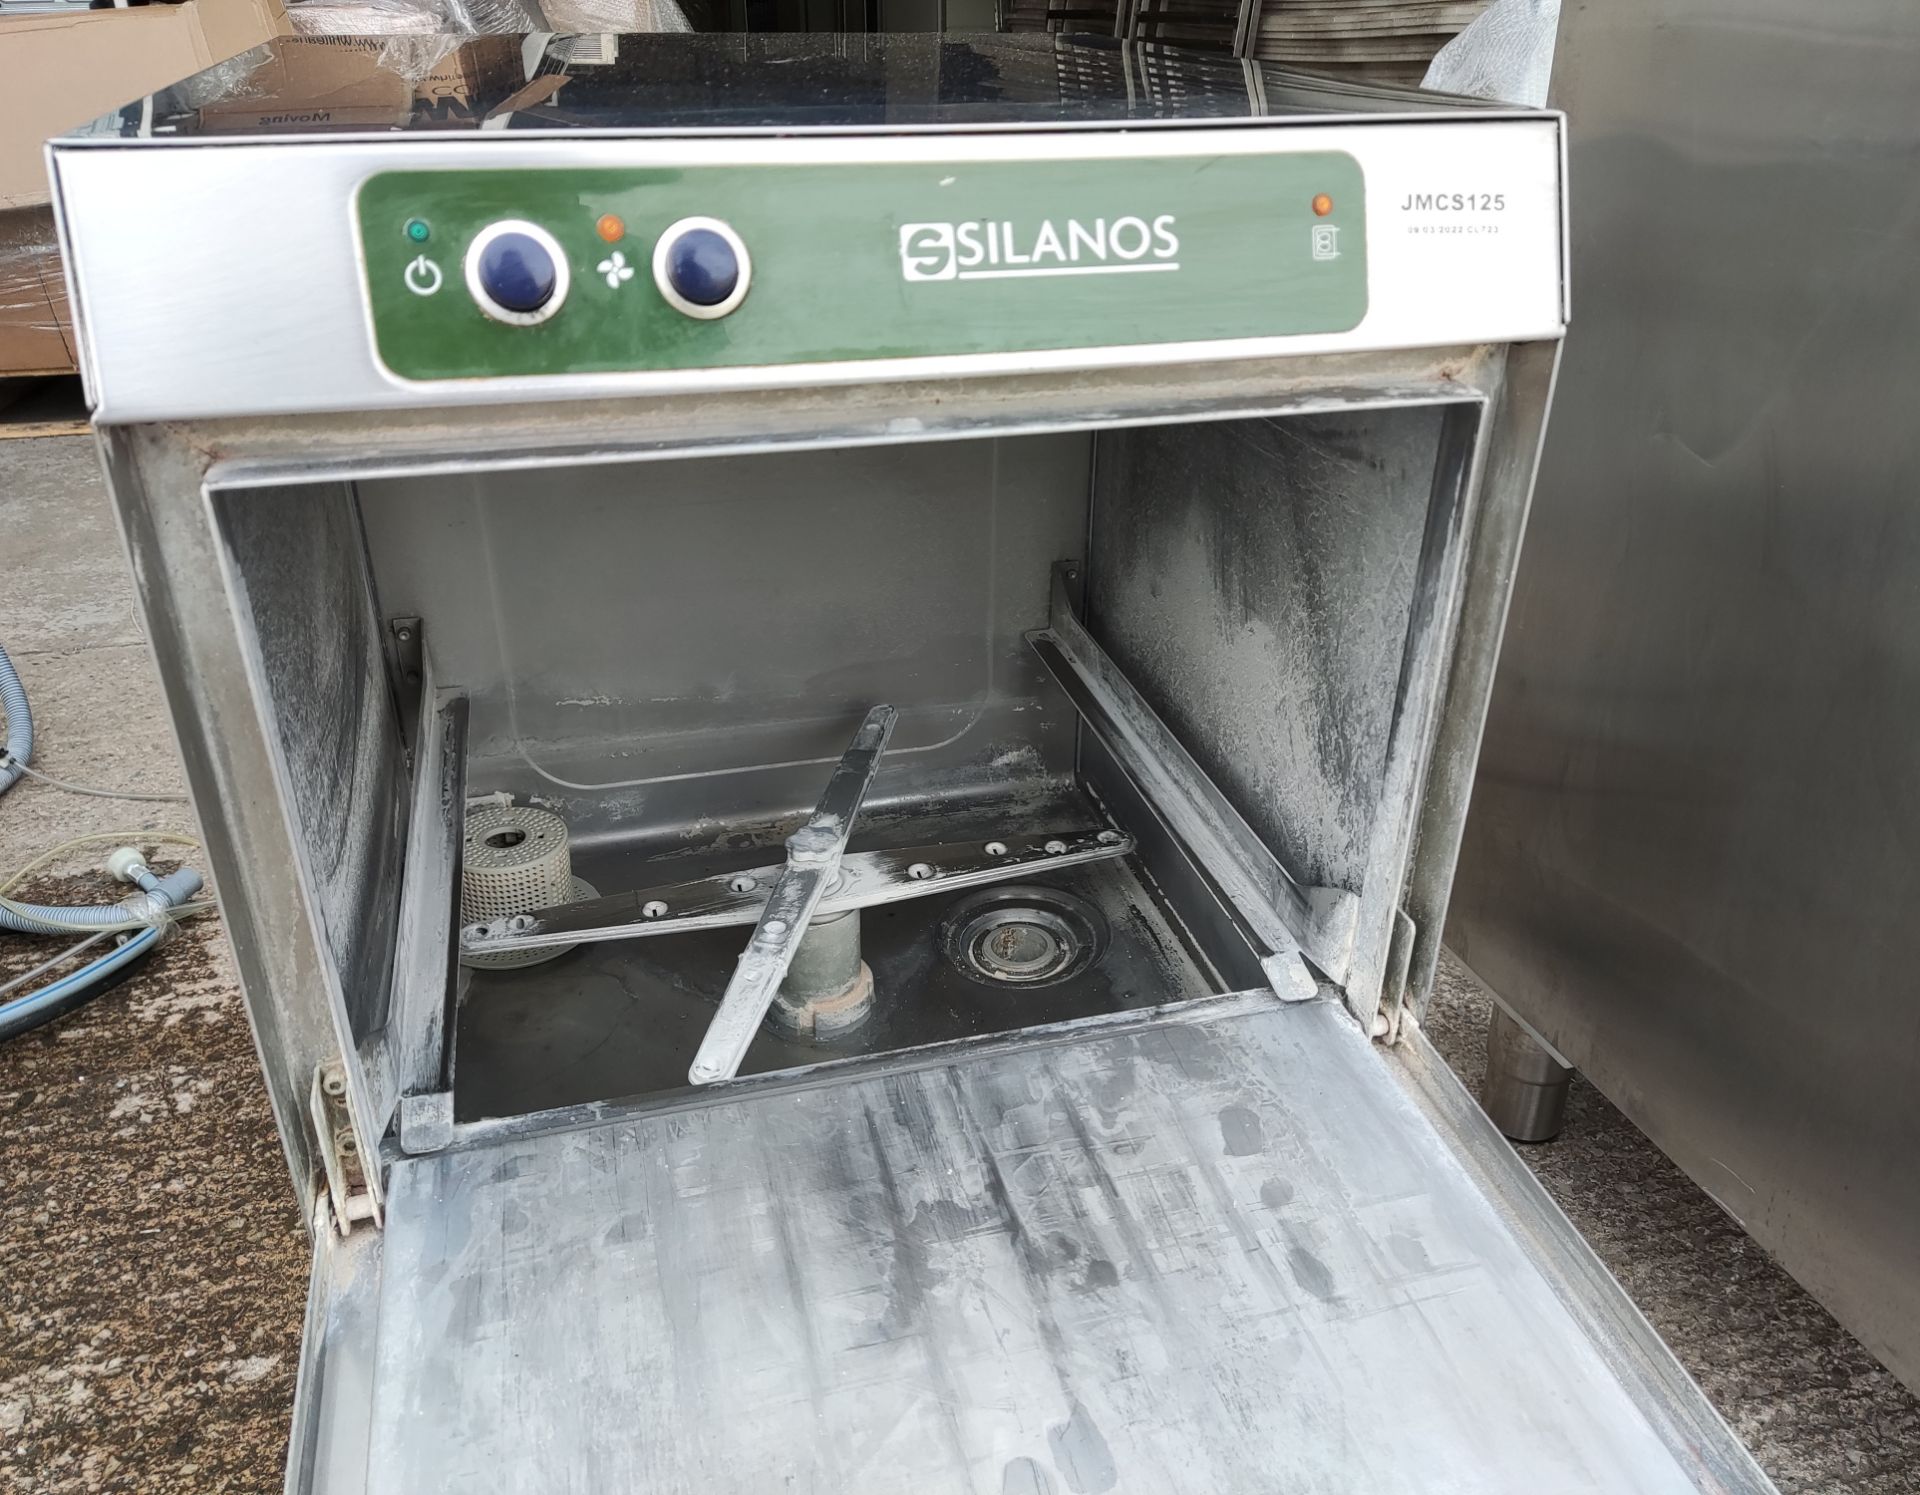 1 x Silanos E40 ECO Undercounter Glass Washer with Low Stand - JMCS125 - CL723 - Location: Altrincha - Image 11 of 12